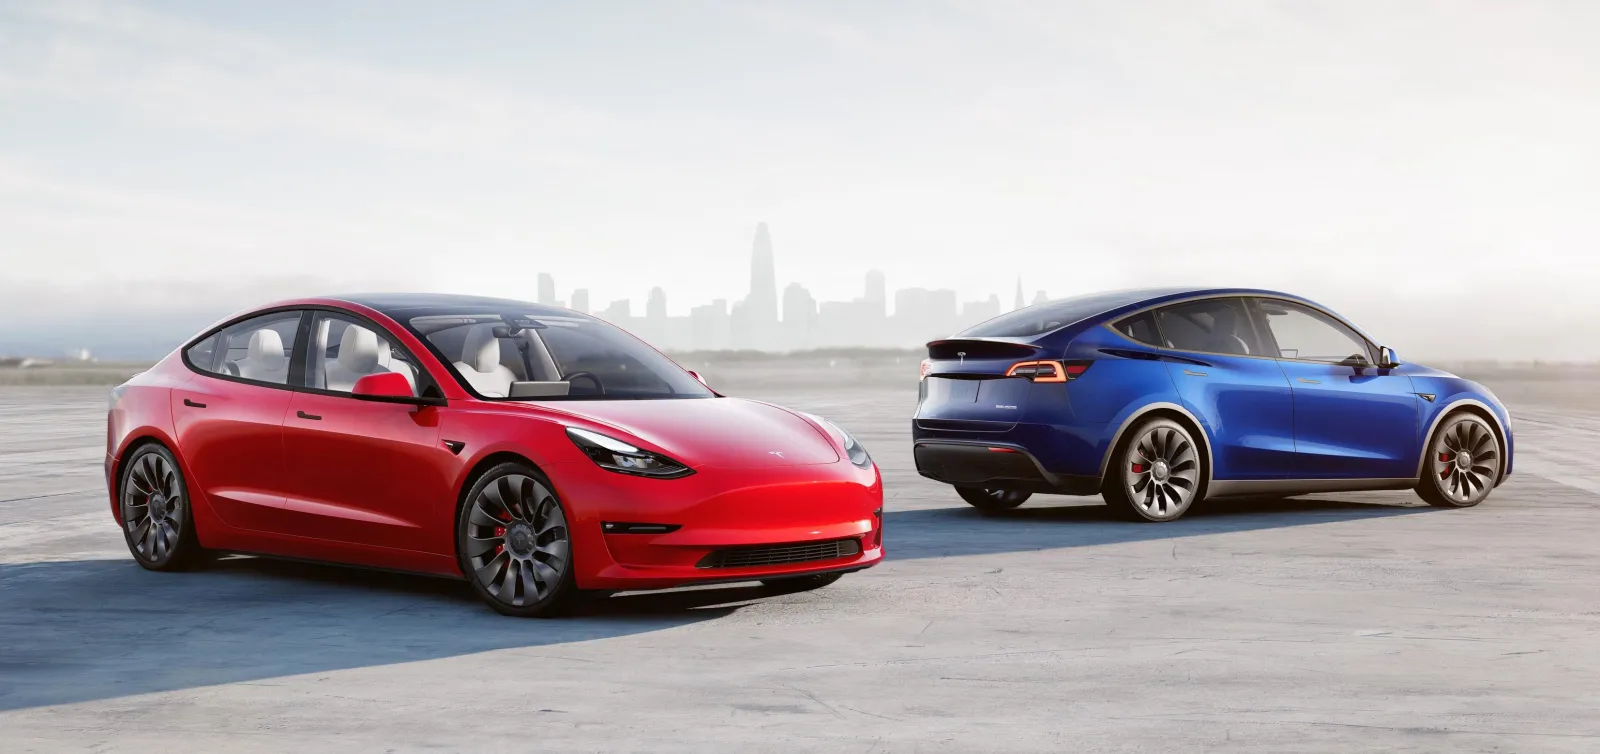 Temporary Discount on Model Y: Grab Your Deal Now!